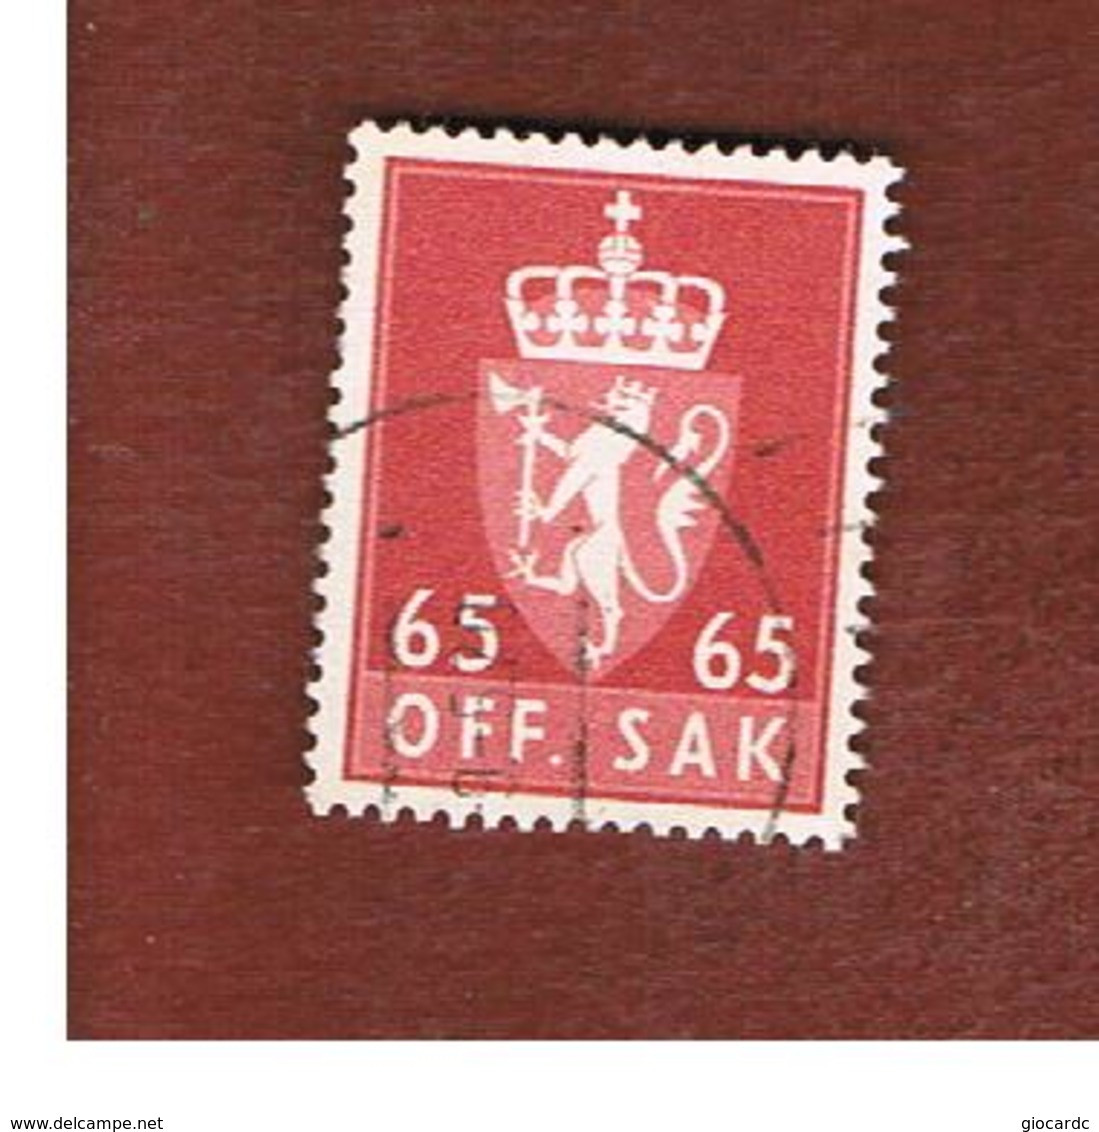 NORVEGIA (NORWAY) -   SG O475   -  1968  OFFICIAL STAMPS: ARM 65        - USED° - Service